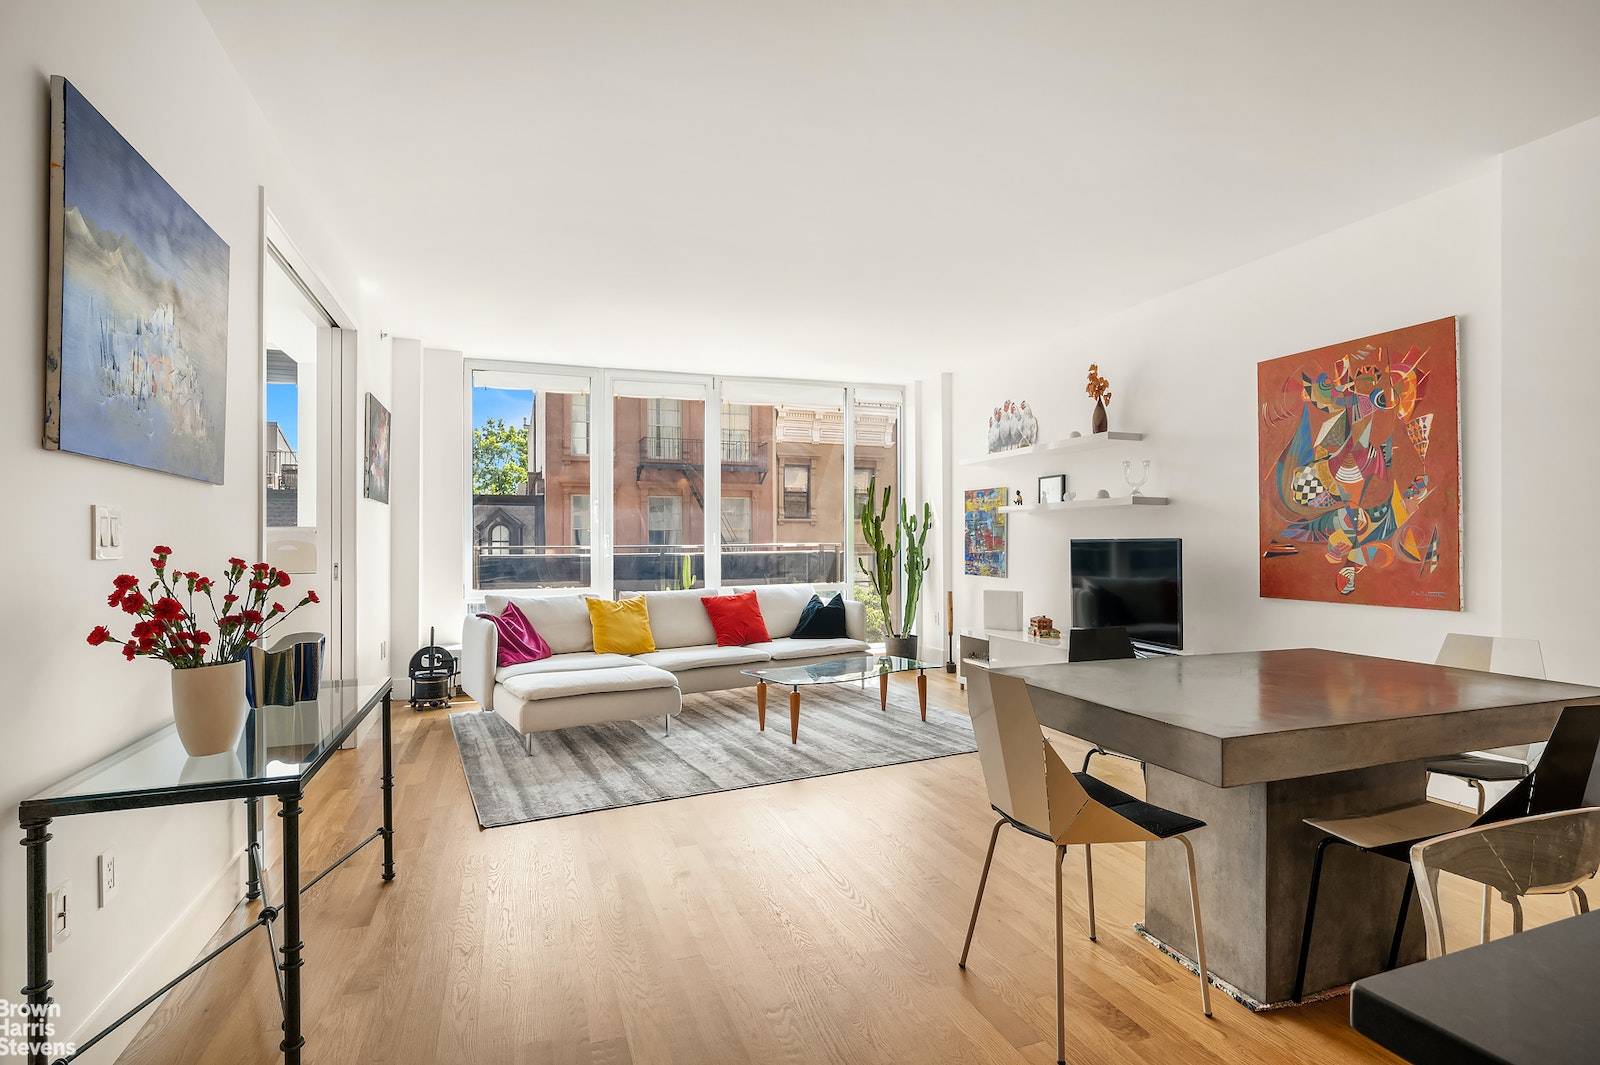 Your turnkey and expansive floor through 3 bed 3 full bath home awaits at 129 West 123rd Street.